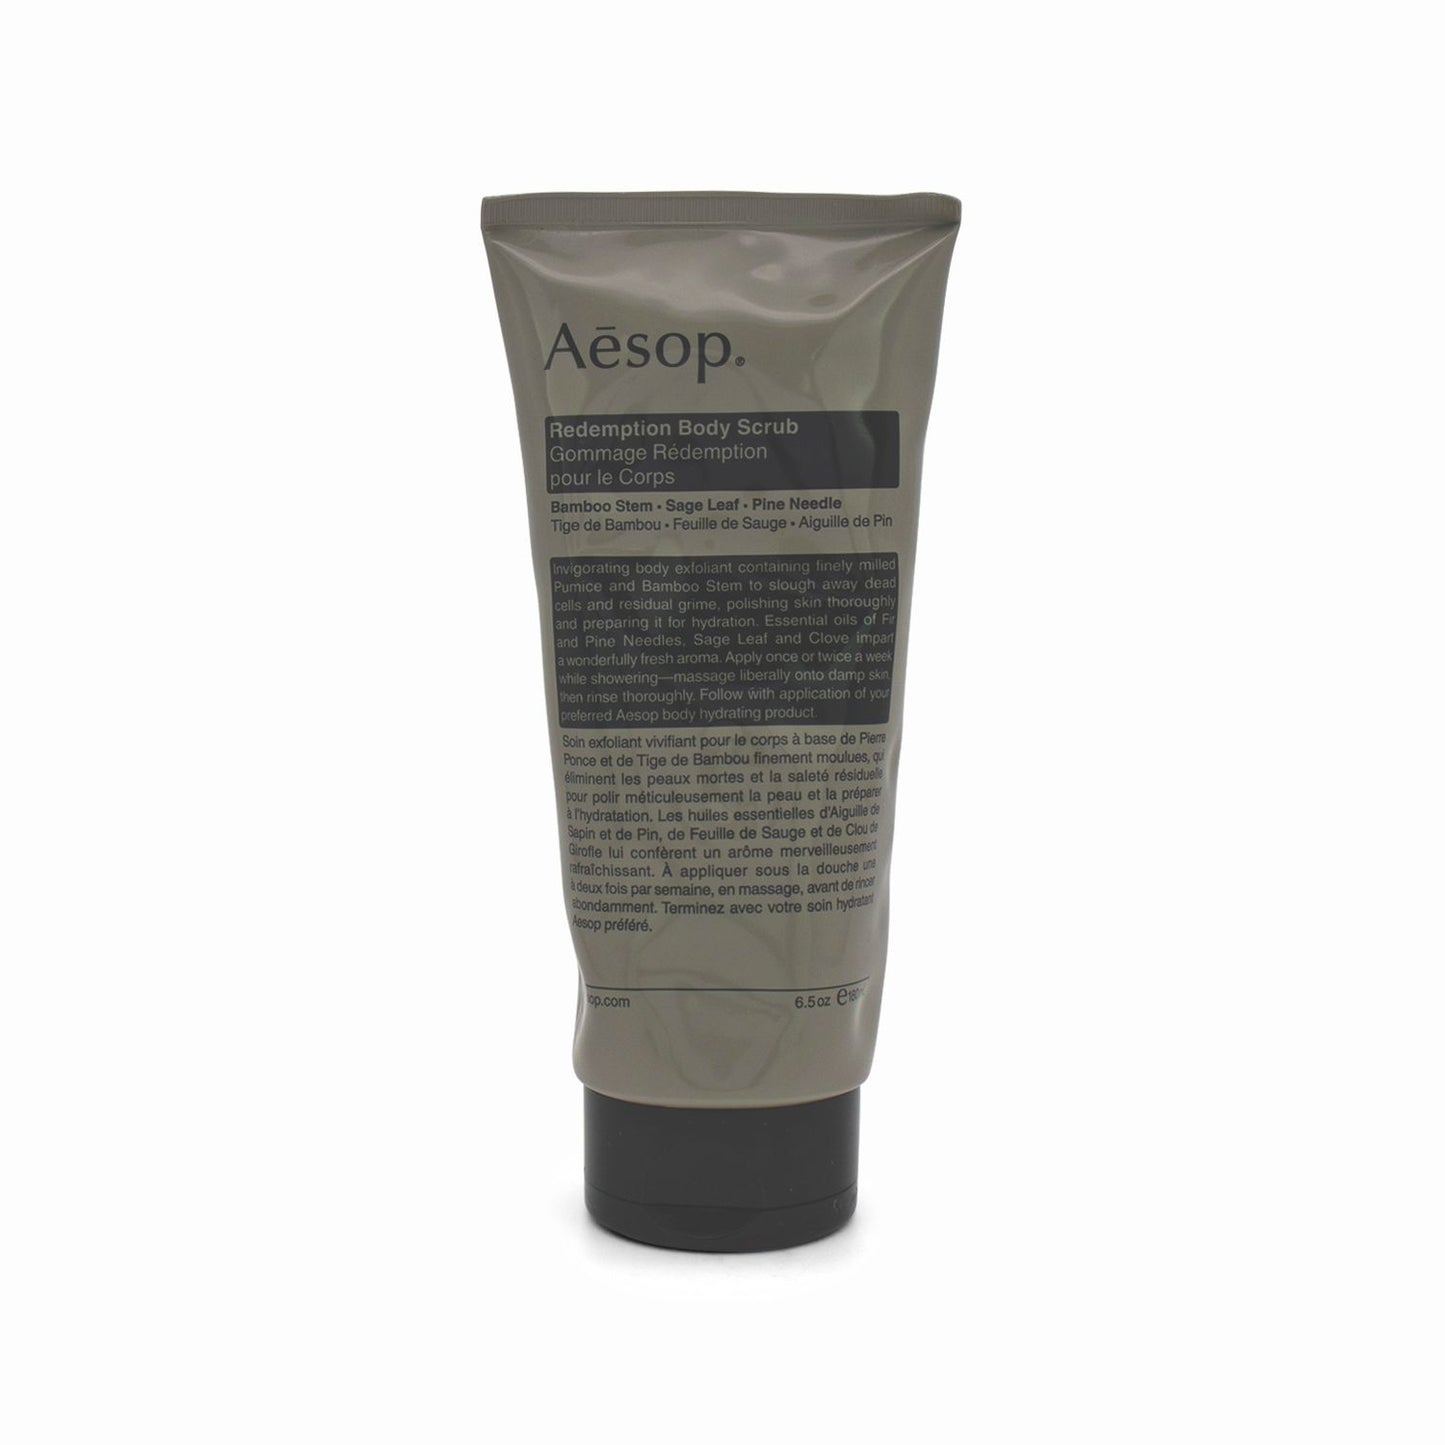 Aesop Redemption Body Scrub 180ml - Imperfect Container